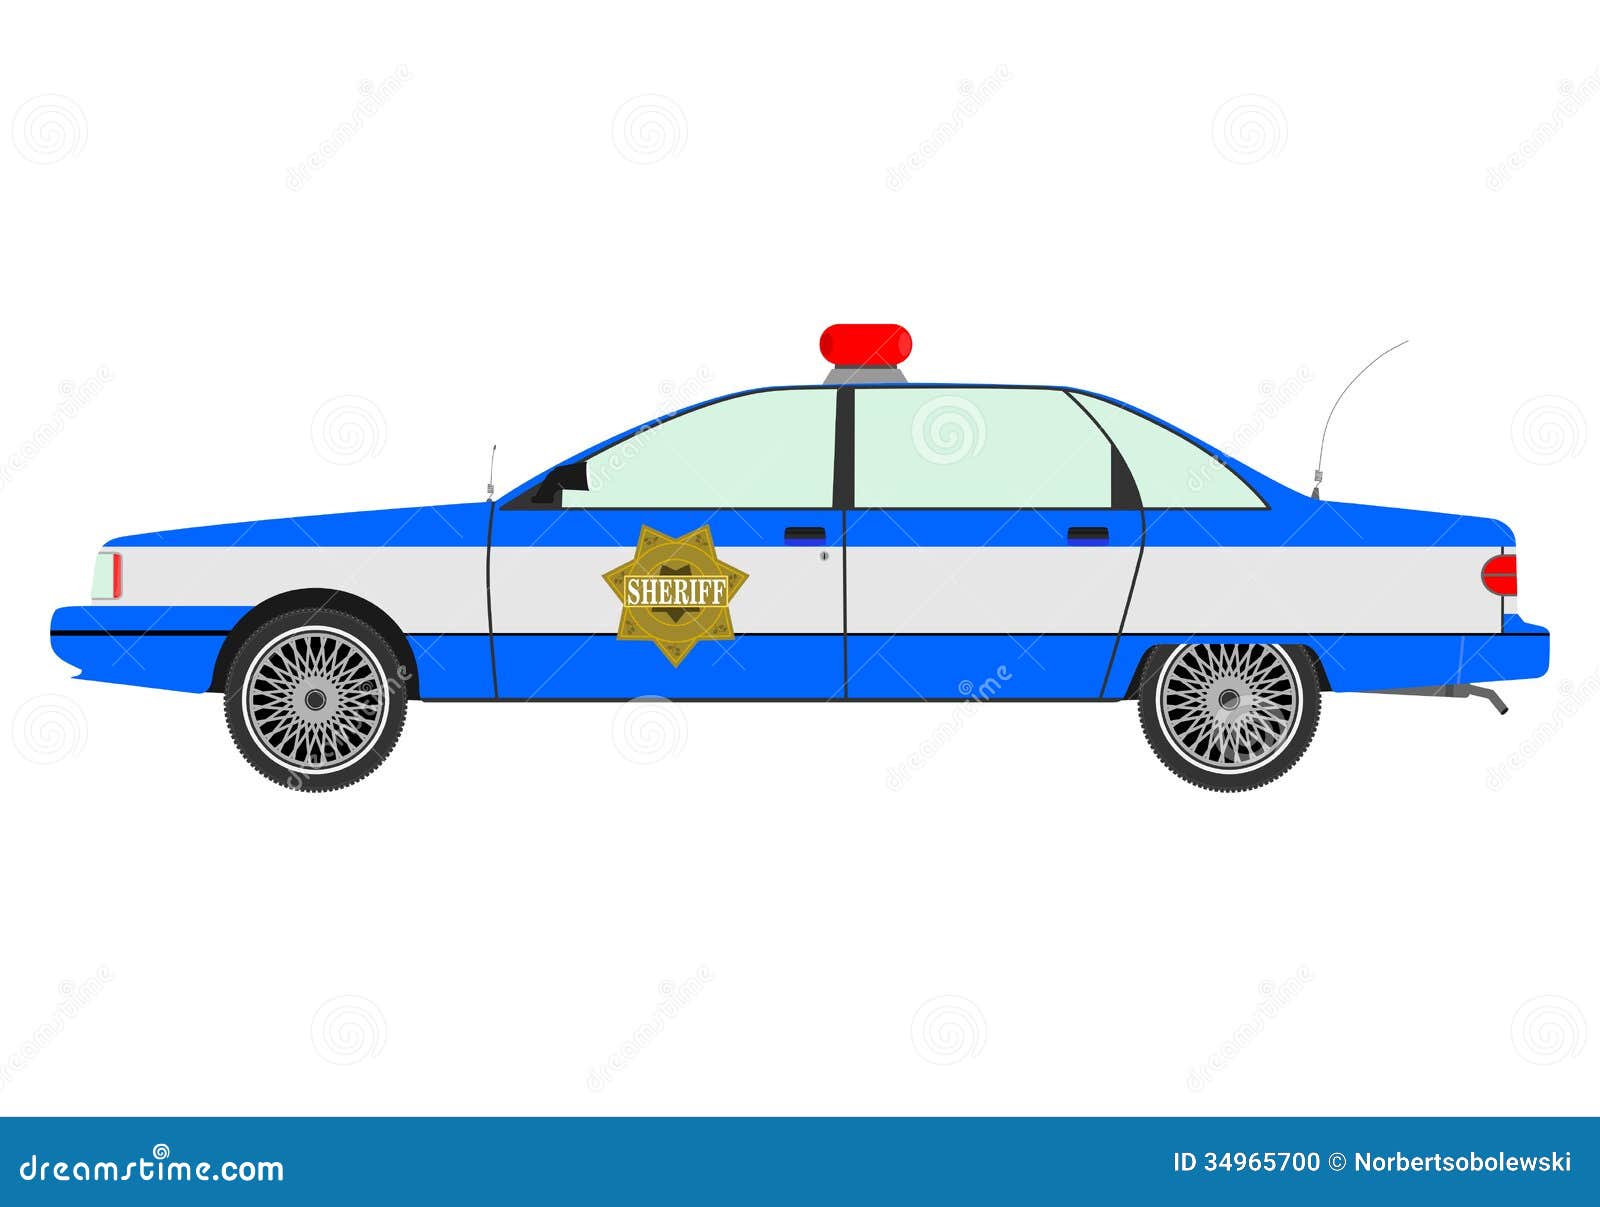 police car clipart images - photo #31